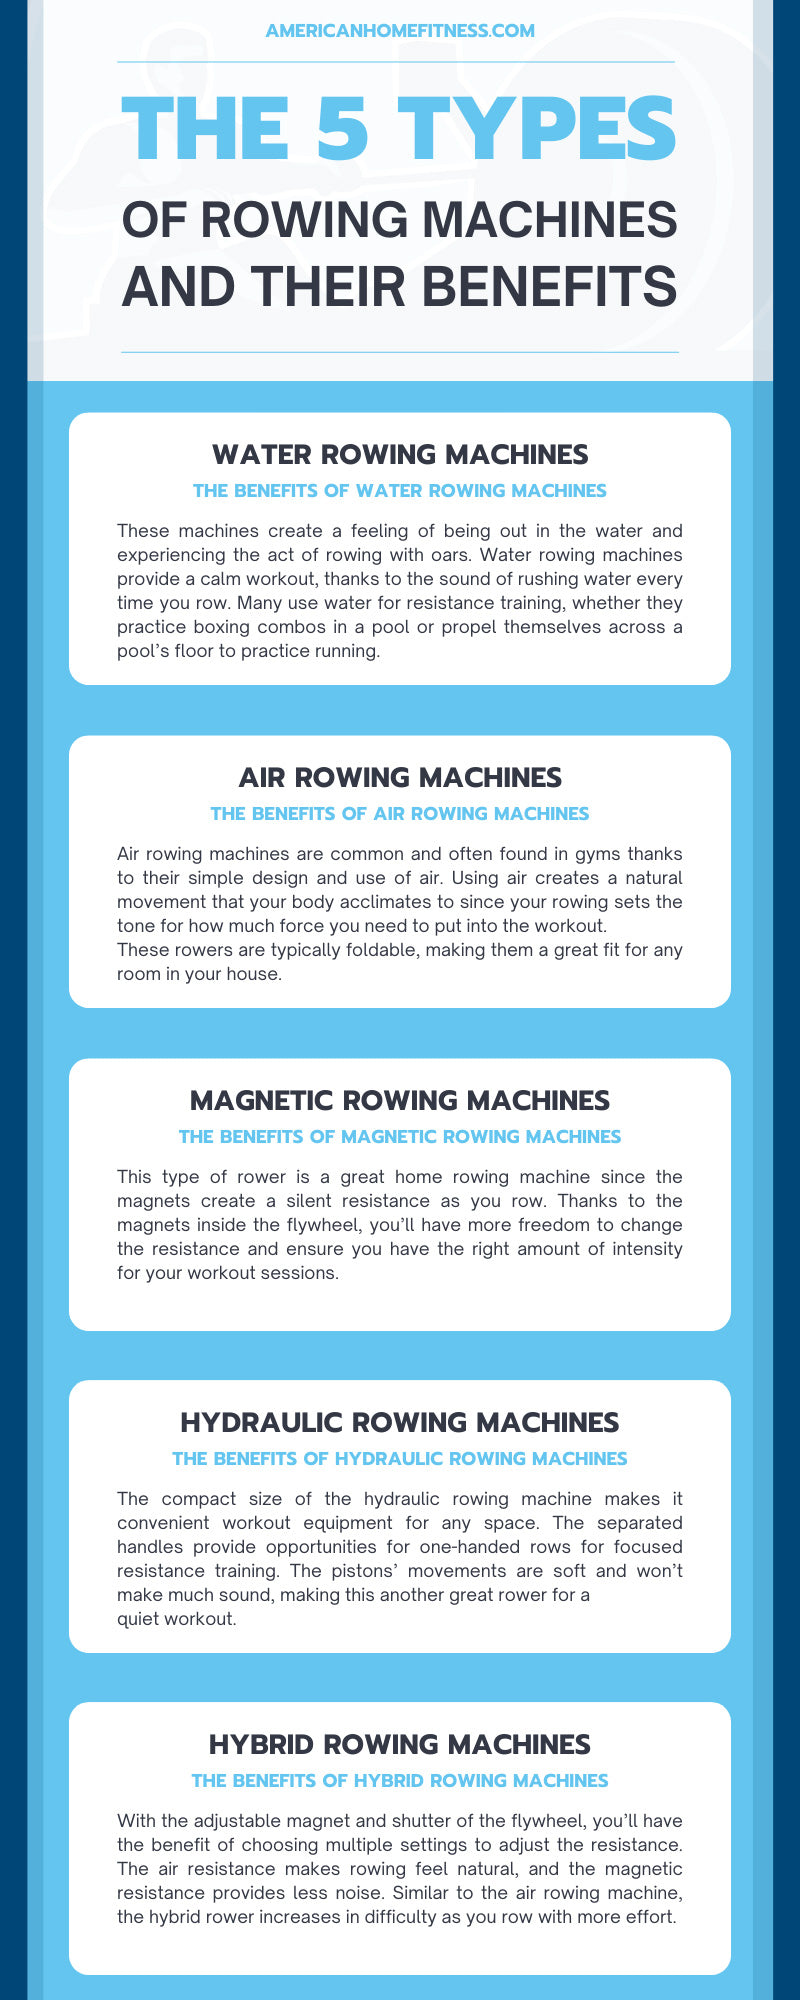 The 5 Types of Rowing Machines and Their Benefits